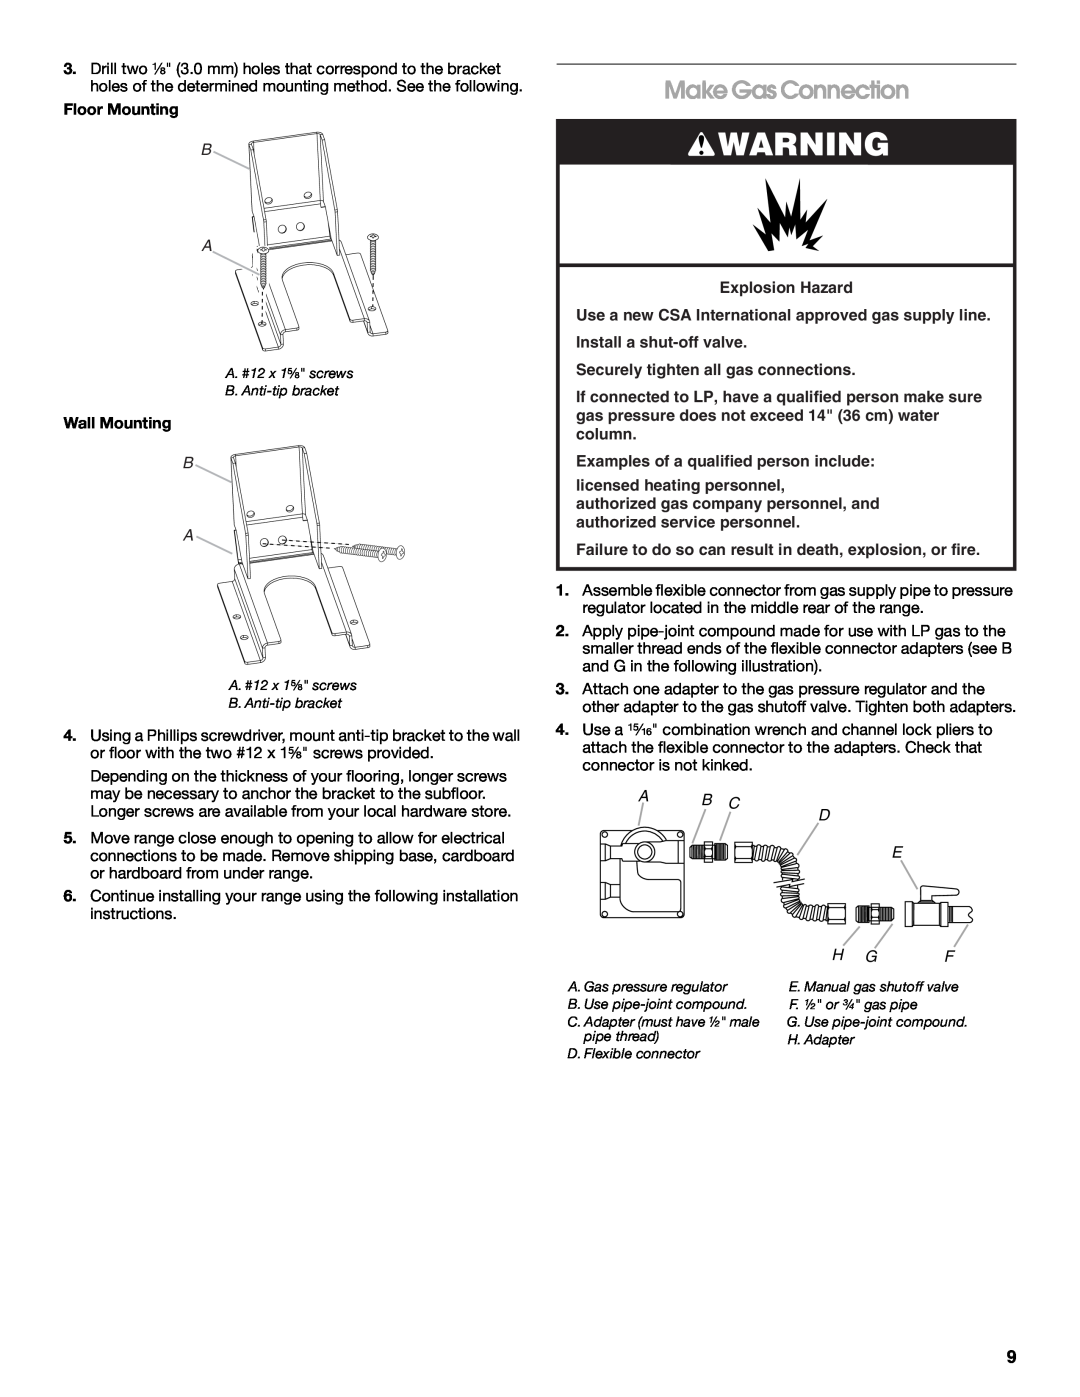 Jenn-Air W10394575A installation instructions Make Gas Connection, Floor Mounting, Wall Mounting, A B C D E 